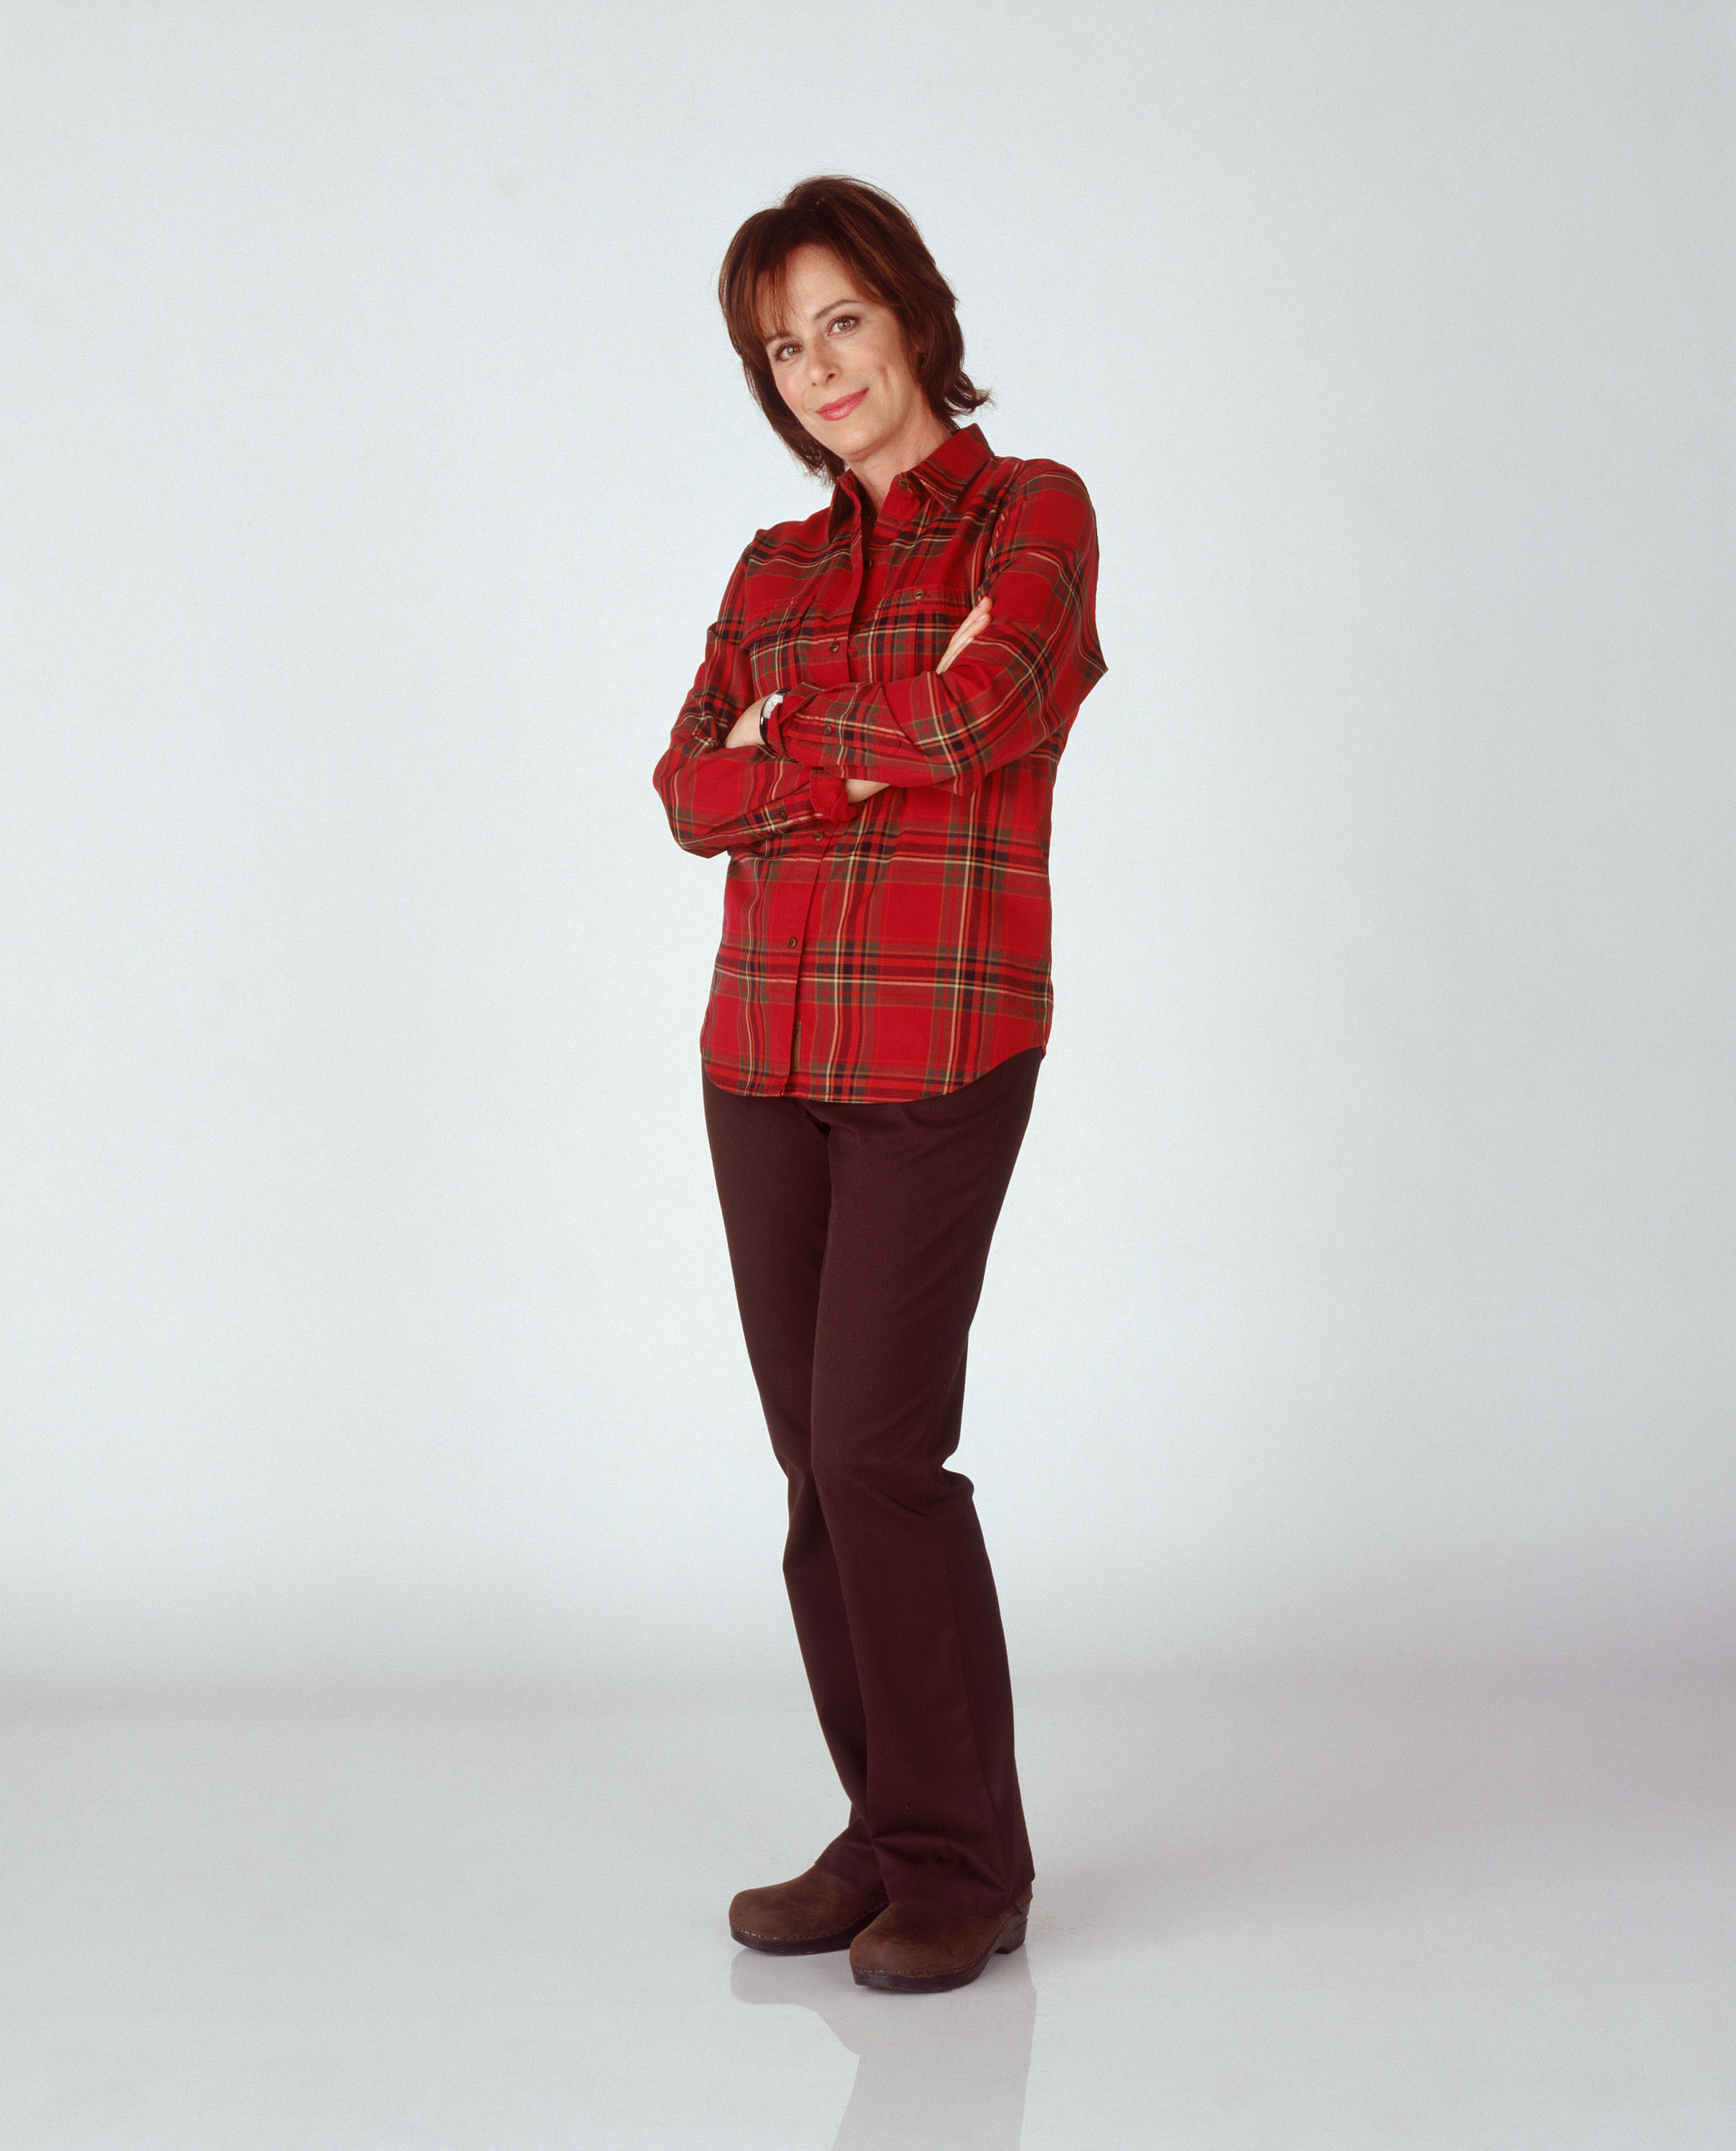 Season Promo Malcolm In The Middle Gallery Photos